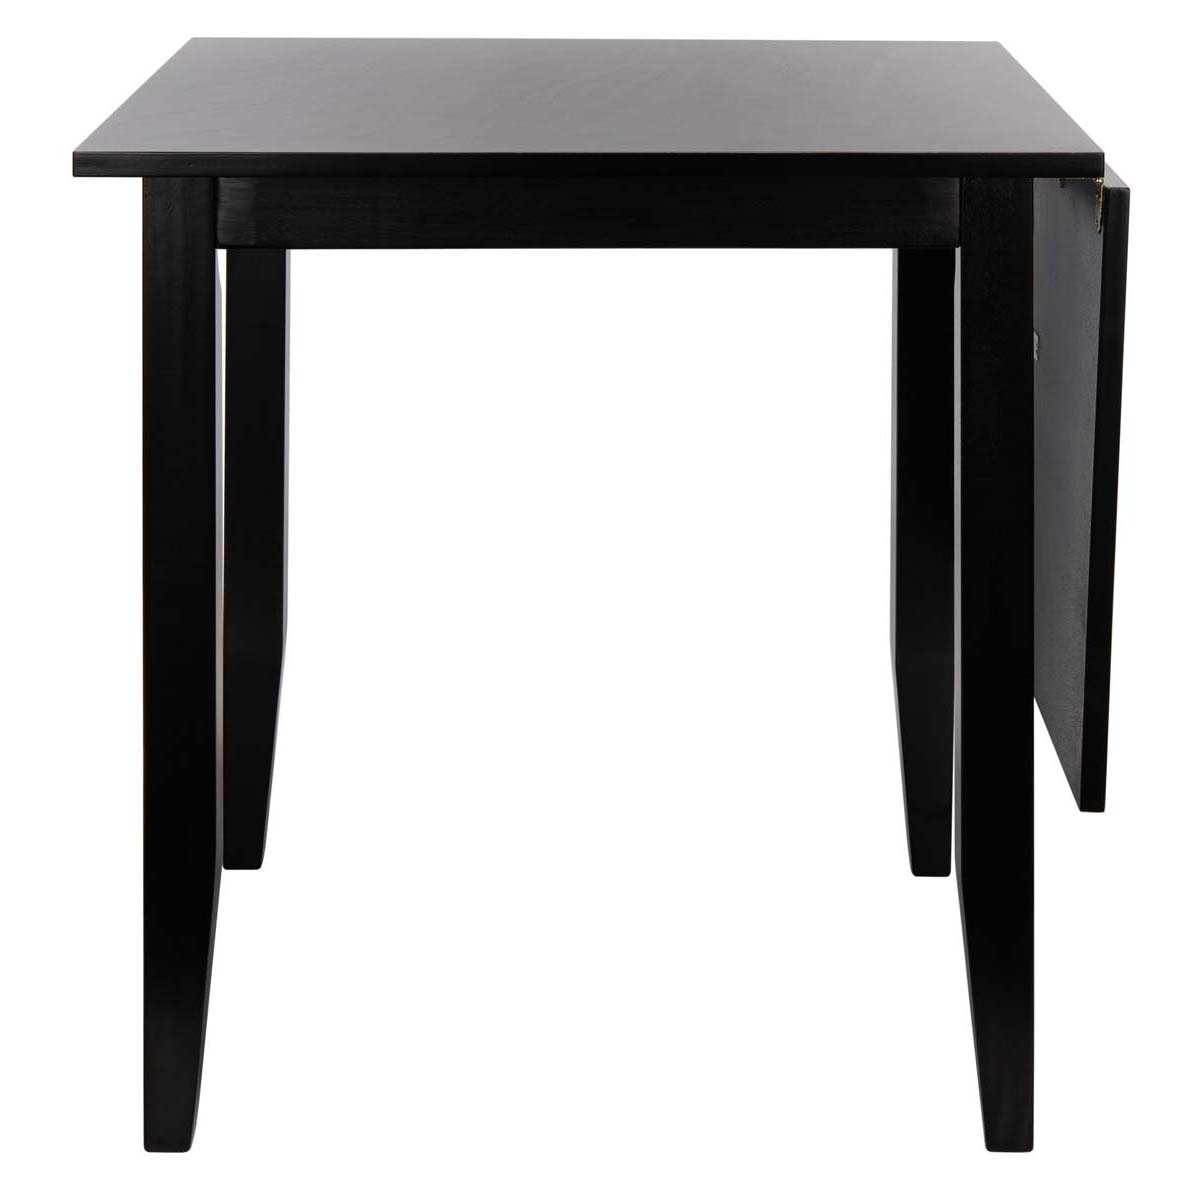 Safavieh Miliano Extension Table , DTB1404